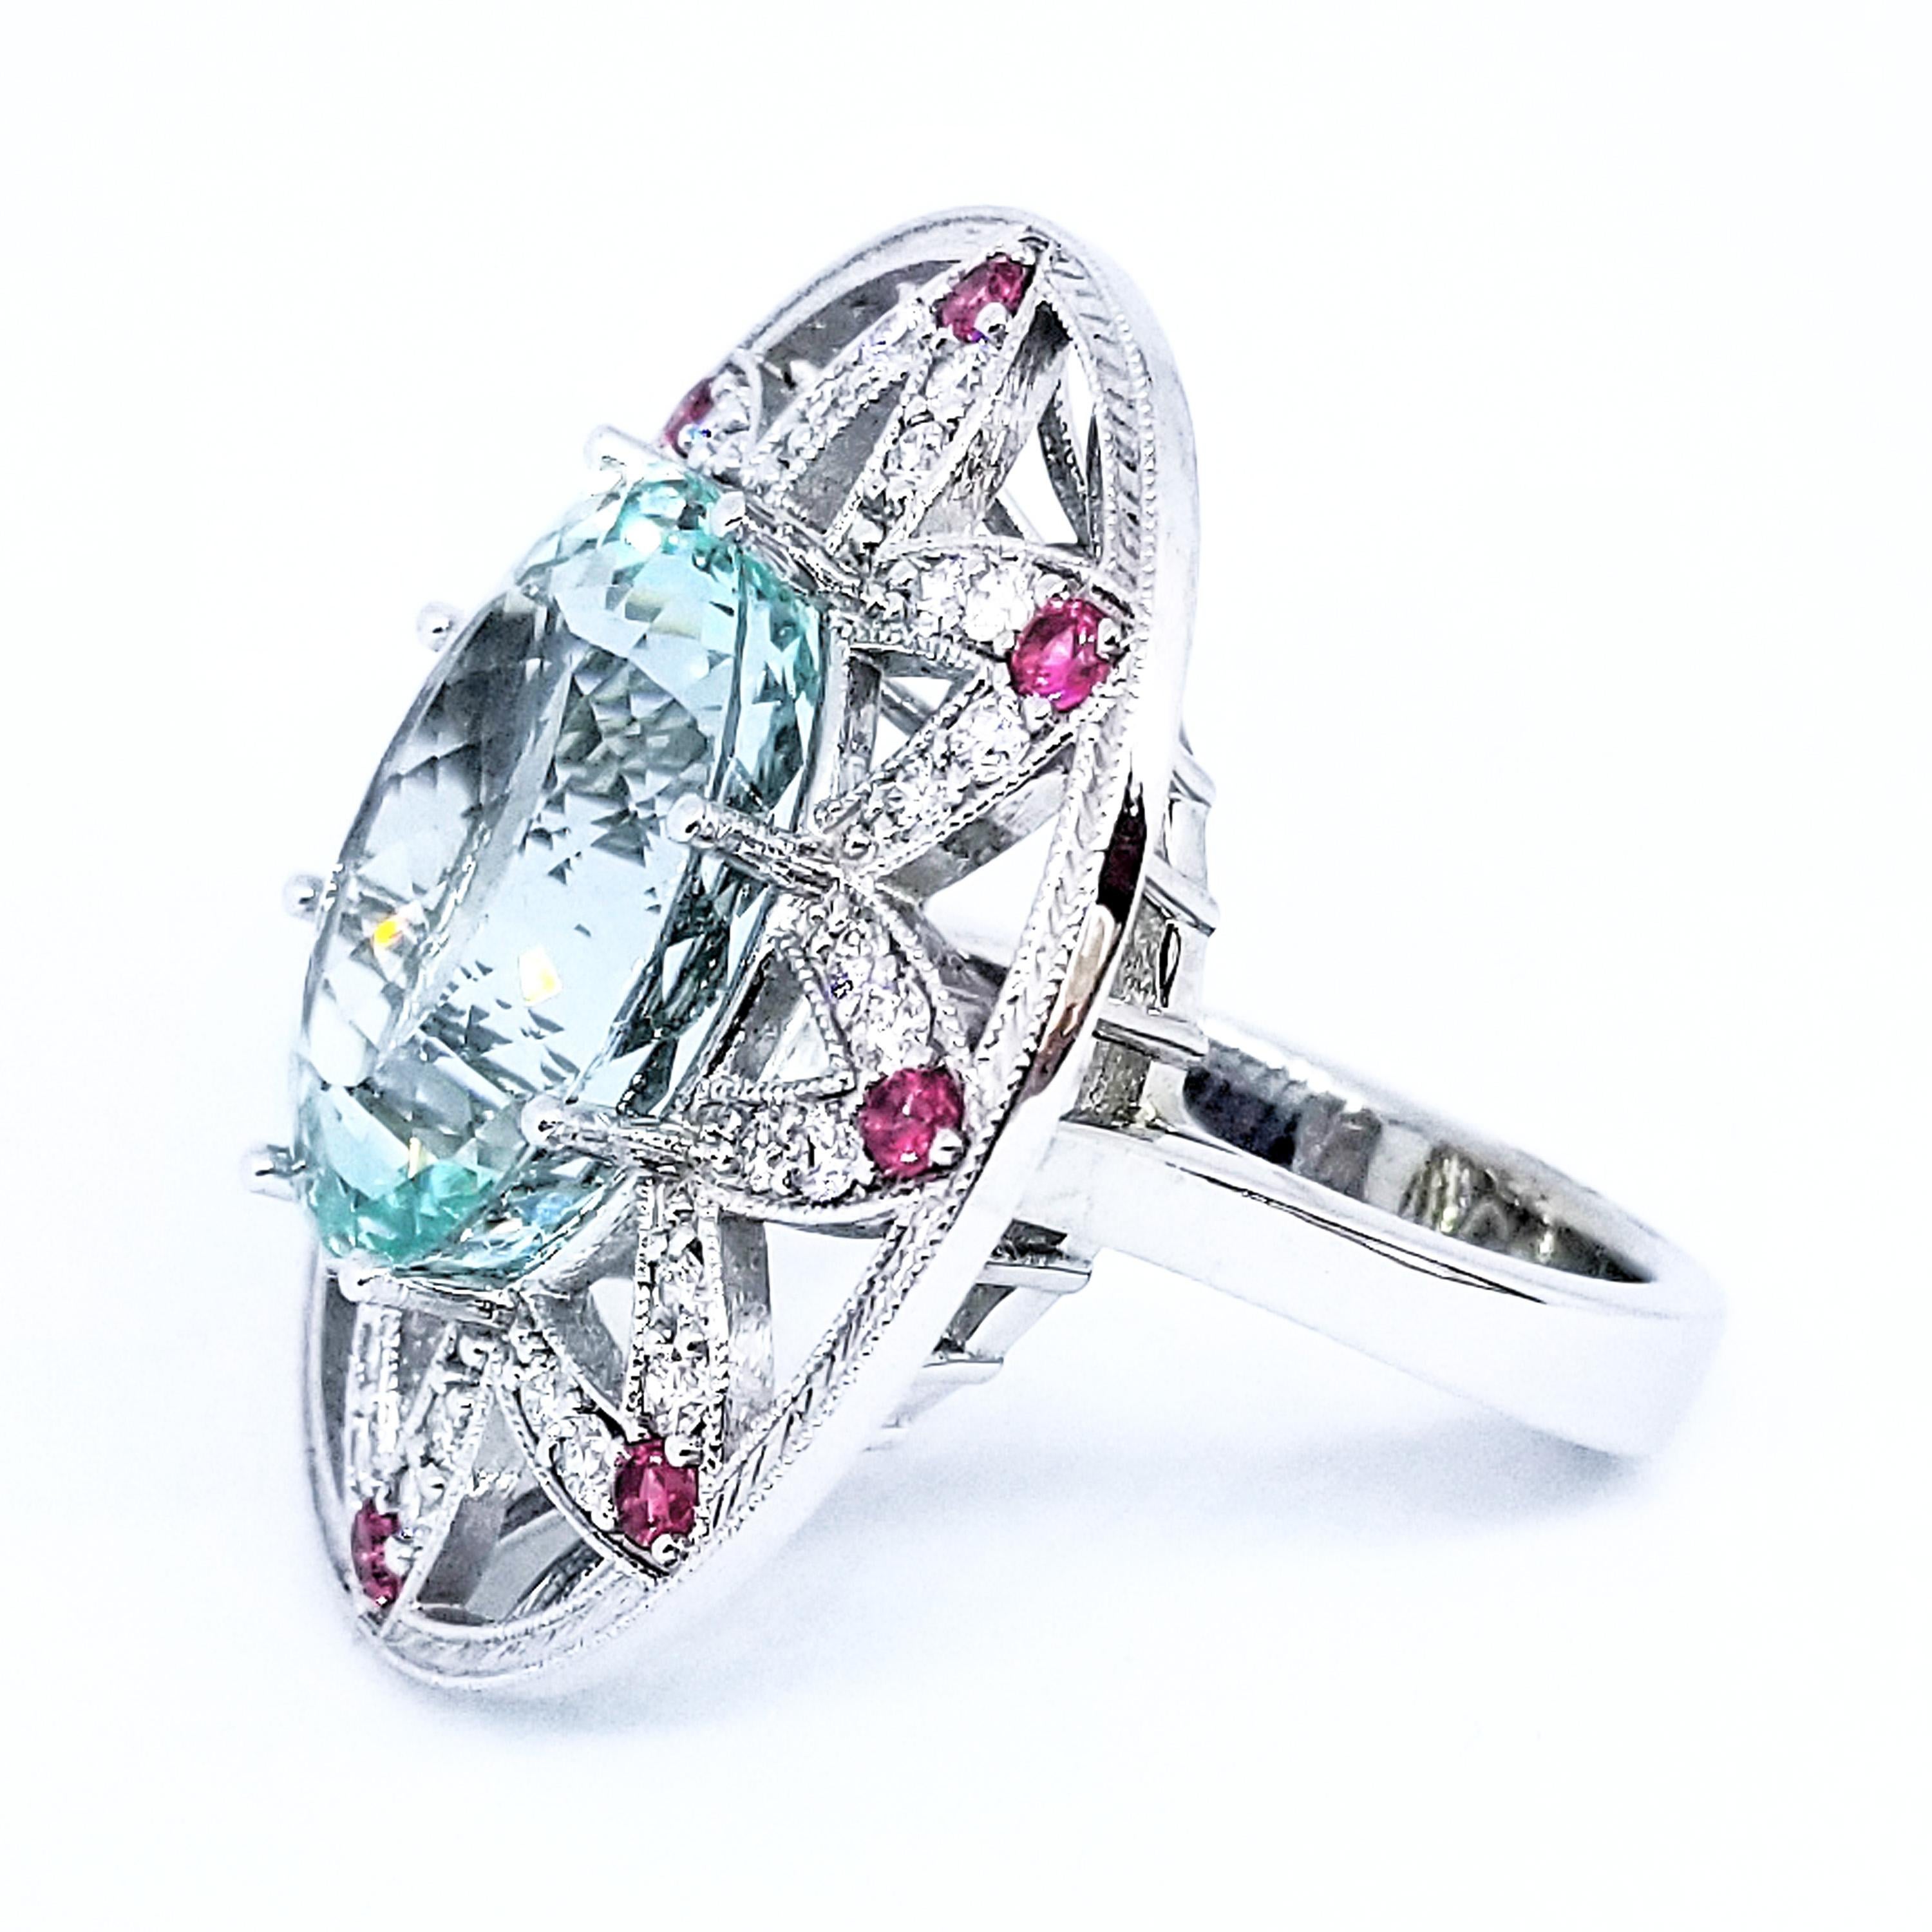 Contemporary 16.90 Carat Brazilian Aquamarine Diamond Intense Red Pink Spinel Cocktail Ring For Sale